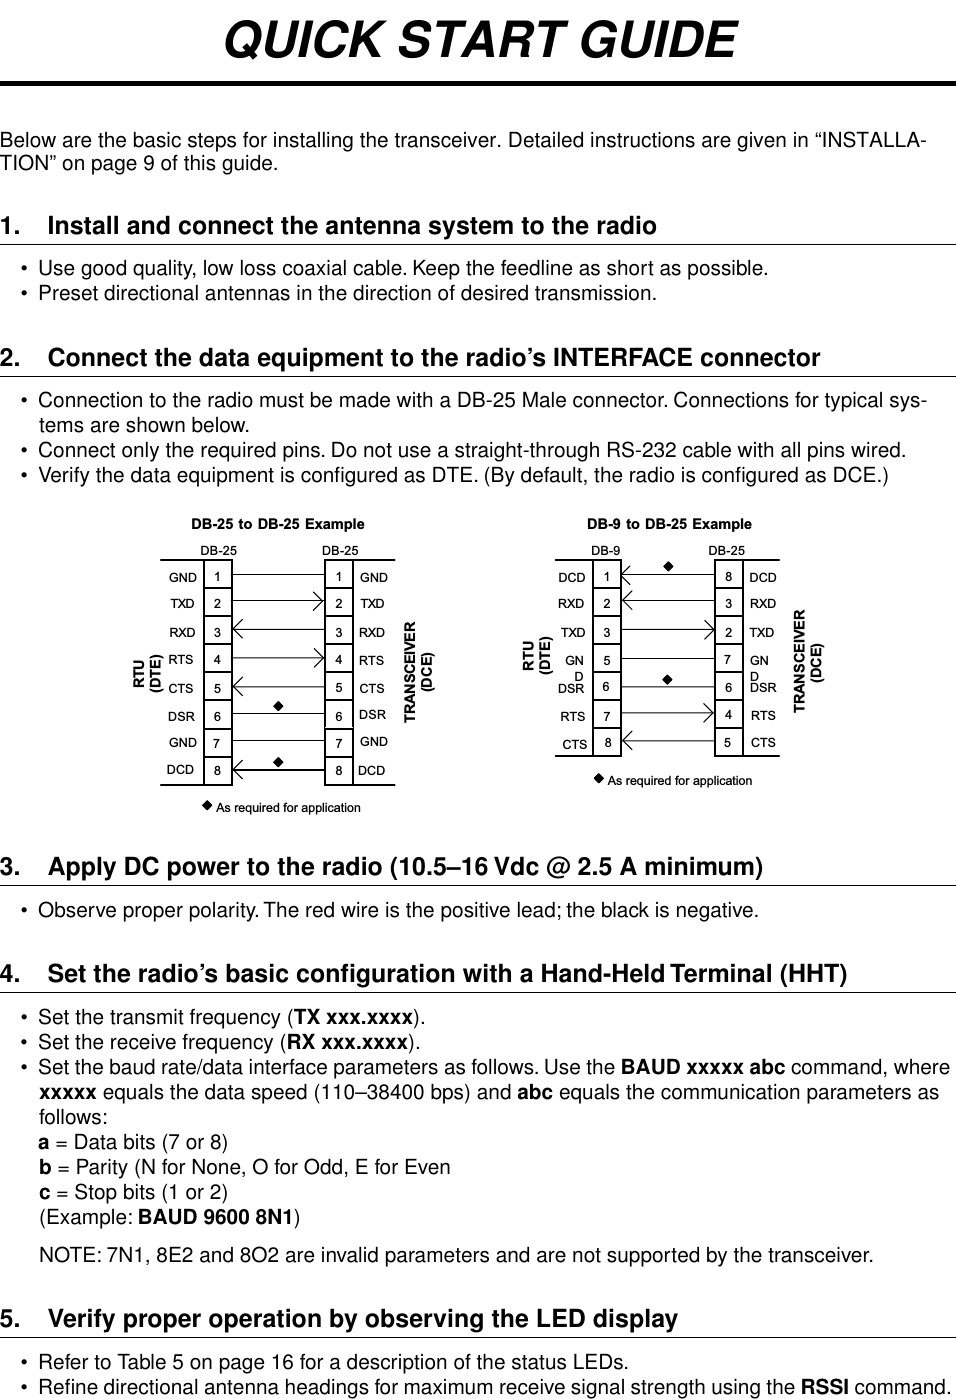  QUICK START GUIDE Below are the basic steps for installing the transceiver. Detailed instructions are given in “INSTALLA-TION” on page 9 of this guide. 1. Install and connect the antenna system to the radio • Use good quality, low loss coaxial cable. Keep the feedline as short as possible.• Preset directional antennas in the direction of desired transmission. 2. Connect the data equipment to the radio’s INTERFACE connector • Connection to the radio must be made with a DB-25 Male connector. Connections for typical sys-tems are shown below. • Connect only the required pins. Do not use a straight-through RS-232 cable with all pins wired.• Verify the data equipment is conﬁgured as DTE. (By default, the radio is conﬁgured as DCE.) 3. Apply DC power to the radio (10.5–16 Vdc @ 2.5 A minimum) • Observe proper polarity. The red wire is the positive lead; the black is negative. 4. Set the radio’s basic conﬁguration with a Hand-Held Terminal (HHT) • Set the transmit frequency ( TX xxx.xxxx ).• Set the receive frequency ( RX xxx.xxxx ).• Set the baud rate/data interface parameters as follows. Use the  BAUD xxxxx abc  command, where  xxxxx  equals the data speed (110–38400 bps) and  abc  equals the communication parameters as follows: a  = Data bits (7 or 8) b  = Parity (N for None, O for Odd, E for Even c  = Stop bits (1 or 2)(Example:  BAUD 9600 8N1 )NOTE: 7N1, 8E2 and 8O2 are invalid parameters and are not supported by the transceiver. 5. Verify proper operation by observing the LED display • Refer to Table 5 on page 16 for a description of the status LEDs.• Reﬁne directional antenna headings for maximum receive signal strength using the  RSSI  command. DB-25 DB-25TRANSCEIVER(DCE)2323RTU(DTE)45206DSR DSR6TXDRXDGNDRTSCTSTXDRXDGND4CTS5RTSDB-9 DB-25DB-9 to DB-25 ExampleDB-25 to DB-25 Example1145TRANSCEIVER(DCE)2332RTU(DTE)5207RXDTXDDCDGNDDSRRTSRXDTXDDCDGNDAs required for application51876CTSDSRRTSCTS864577GND GND8 8DCD DCDAs required for application